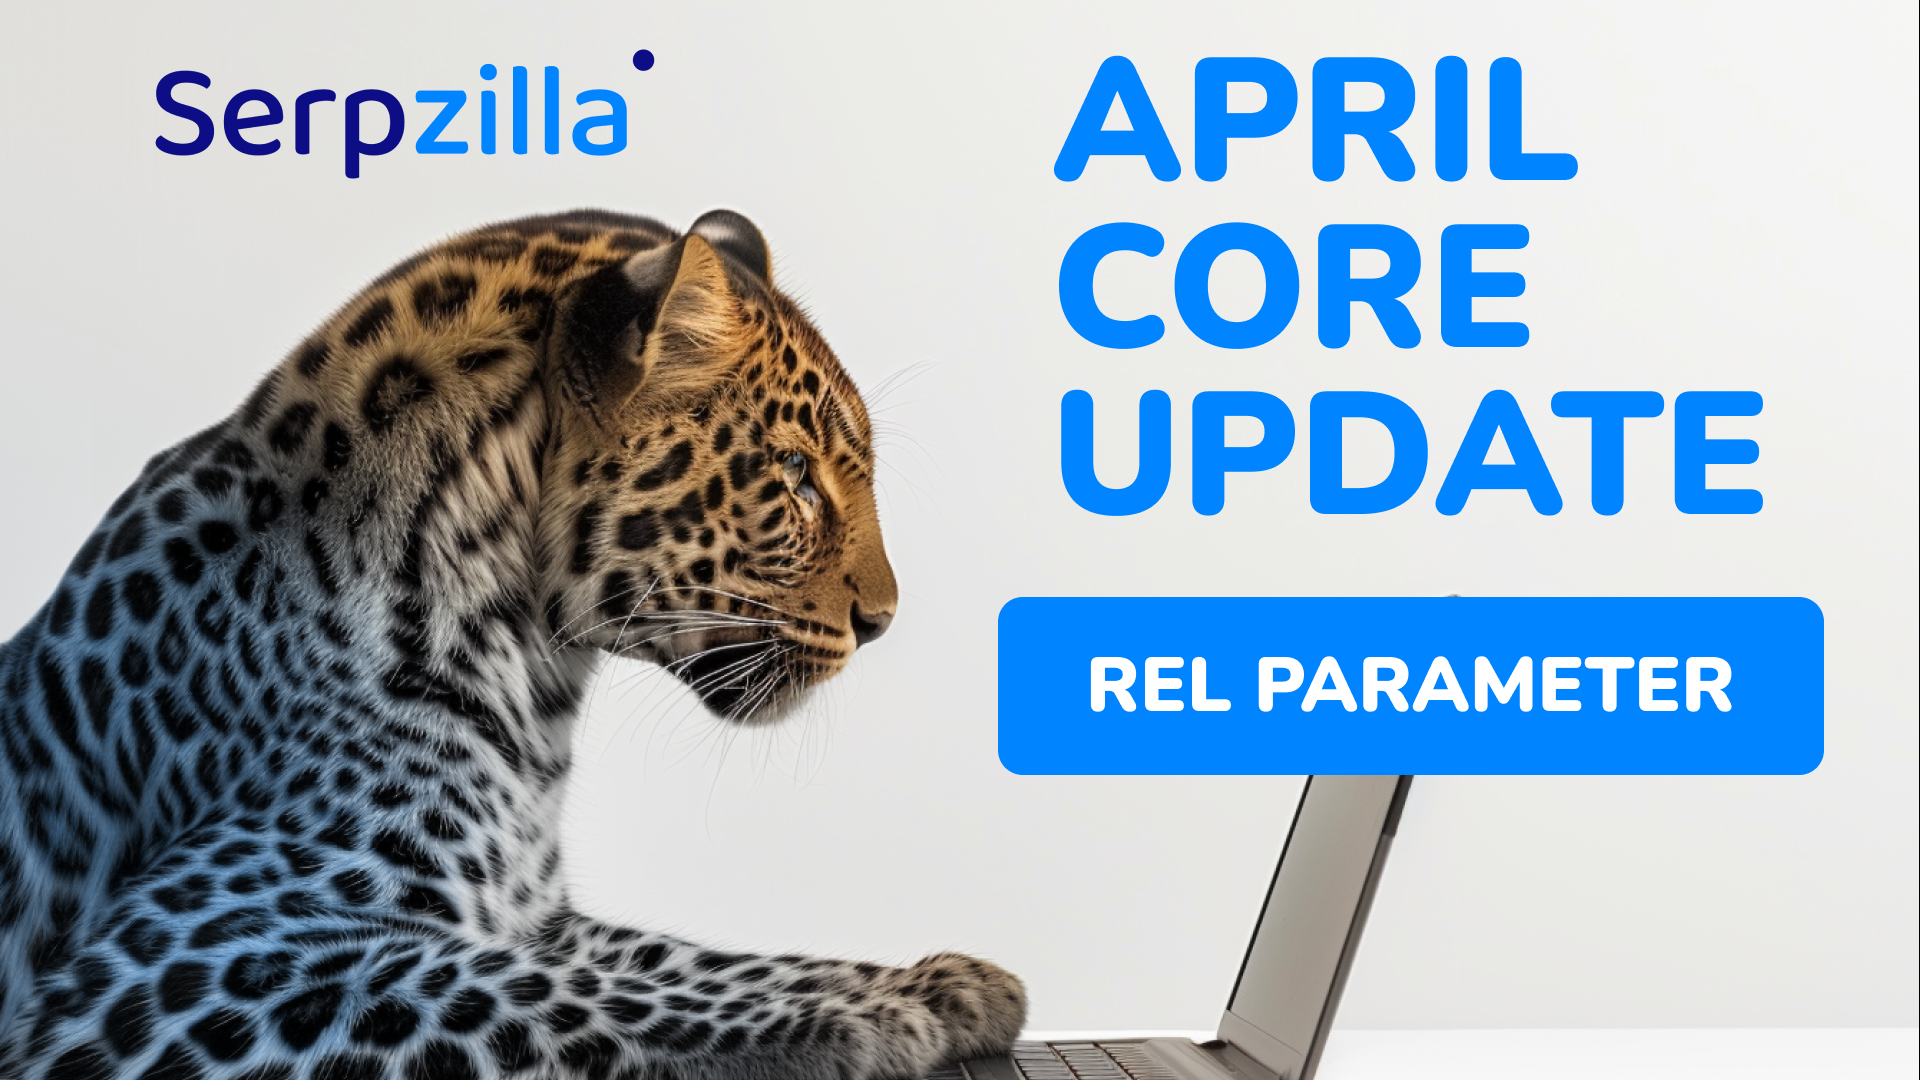 New Features in Serpzilla: Place Guest Posts with the rel attribute with just one click